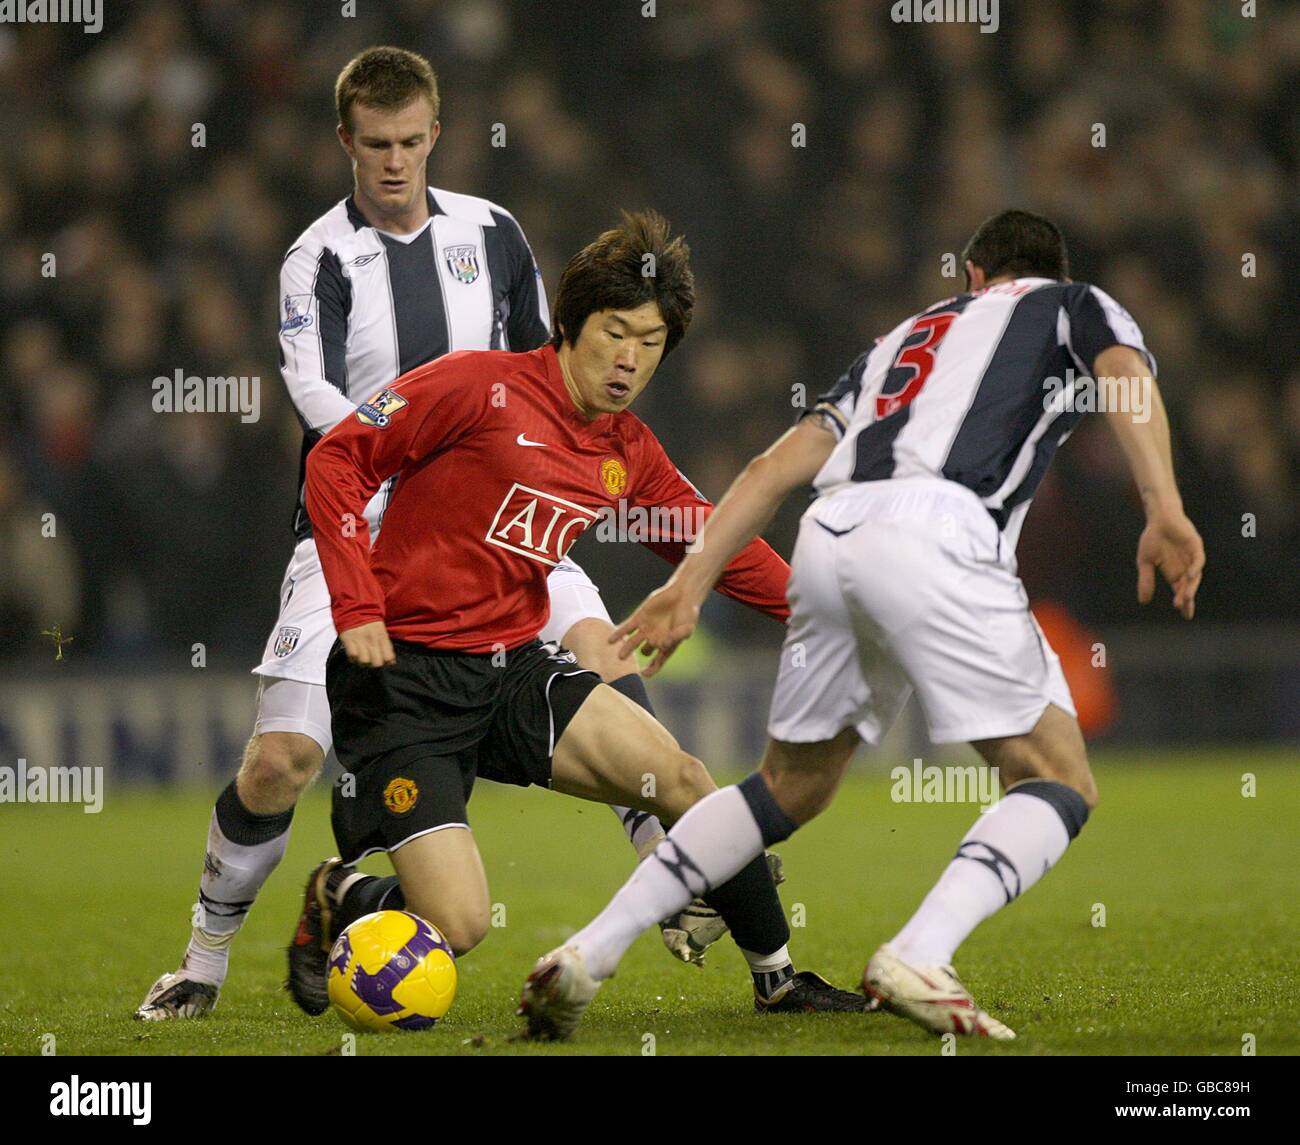 Manchester United's Ji-Sung Park (c) is challenged by West Bromwich Albion's Chris Brunt (l) and Paul Robinson (r) for the ball Stock Photo